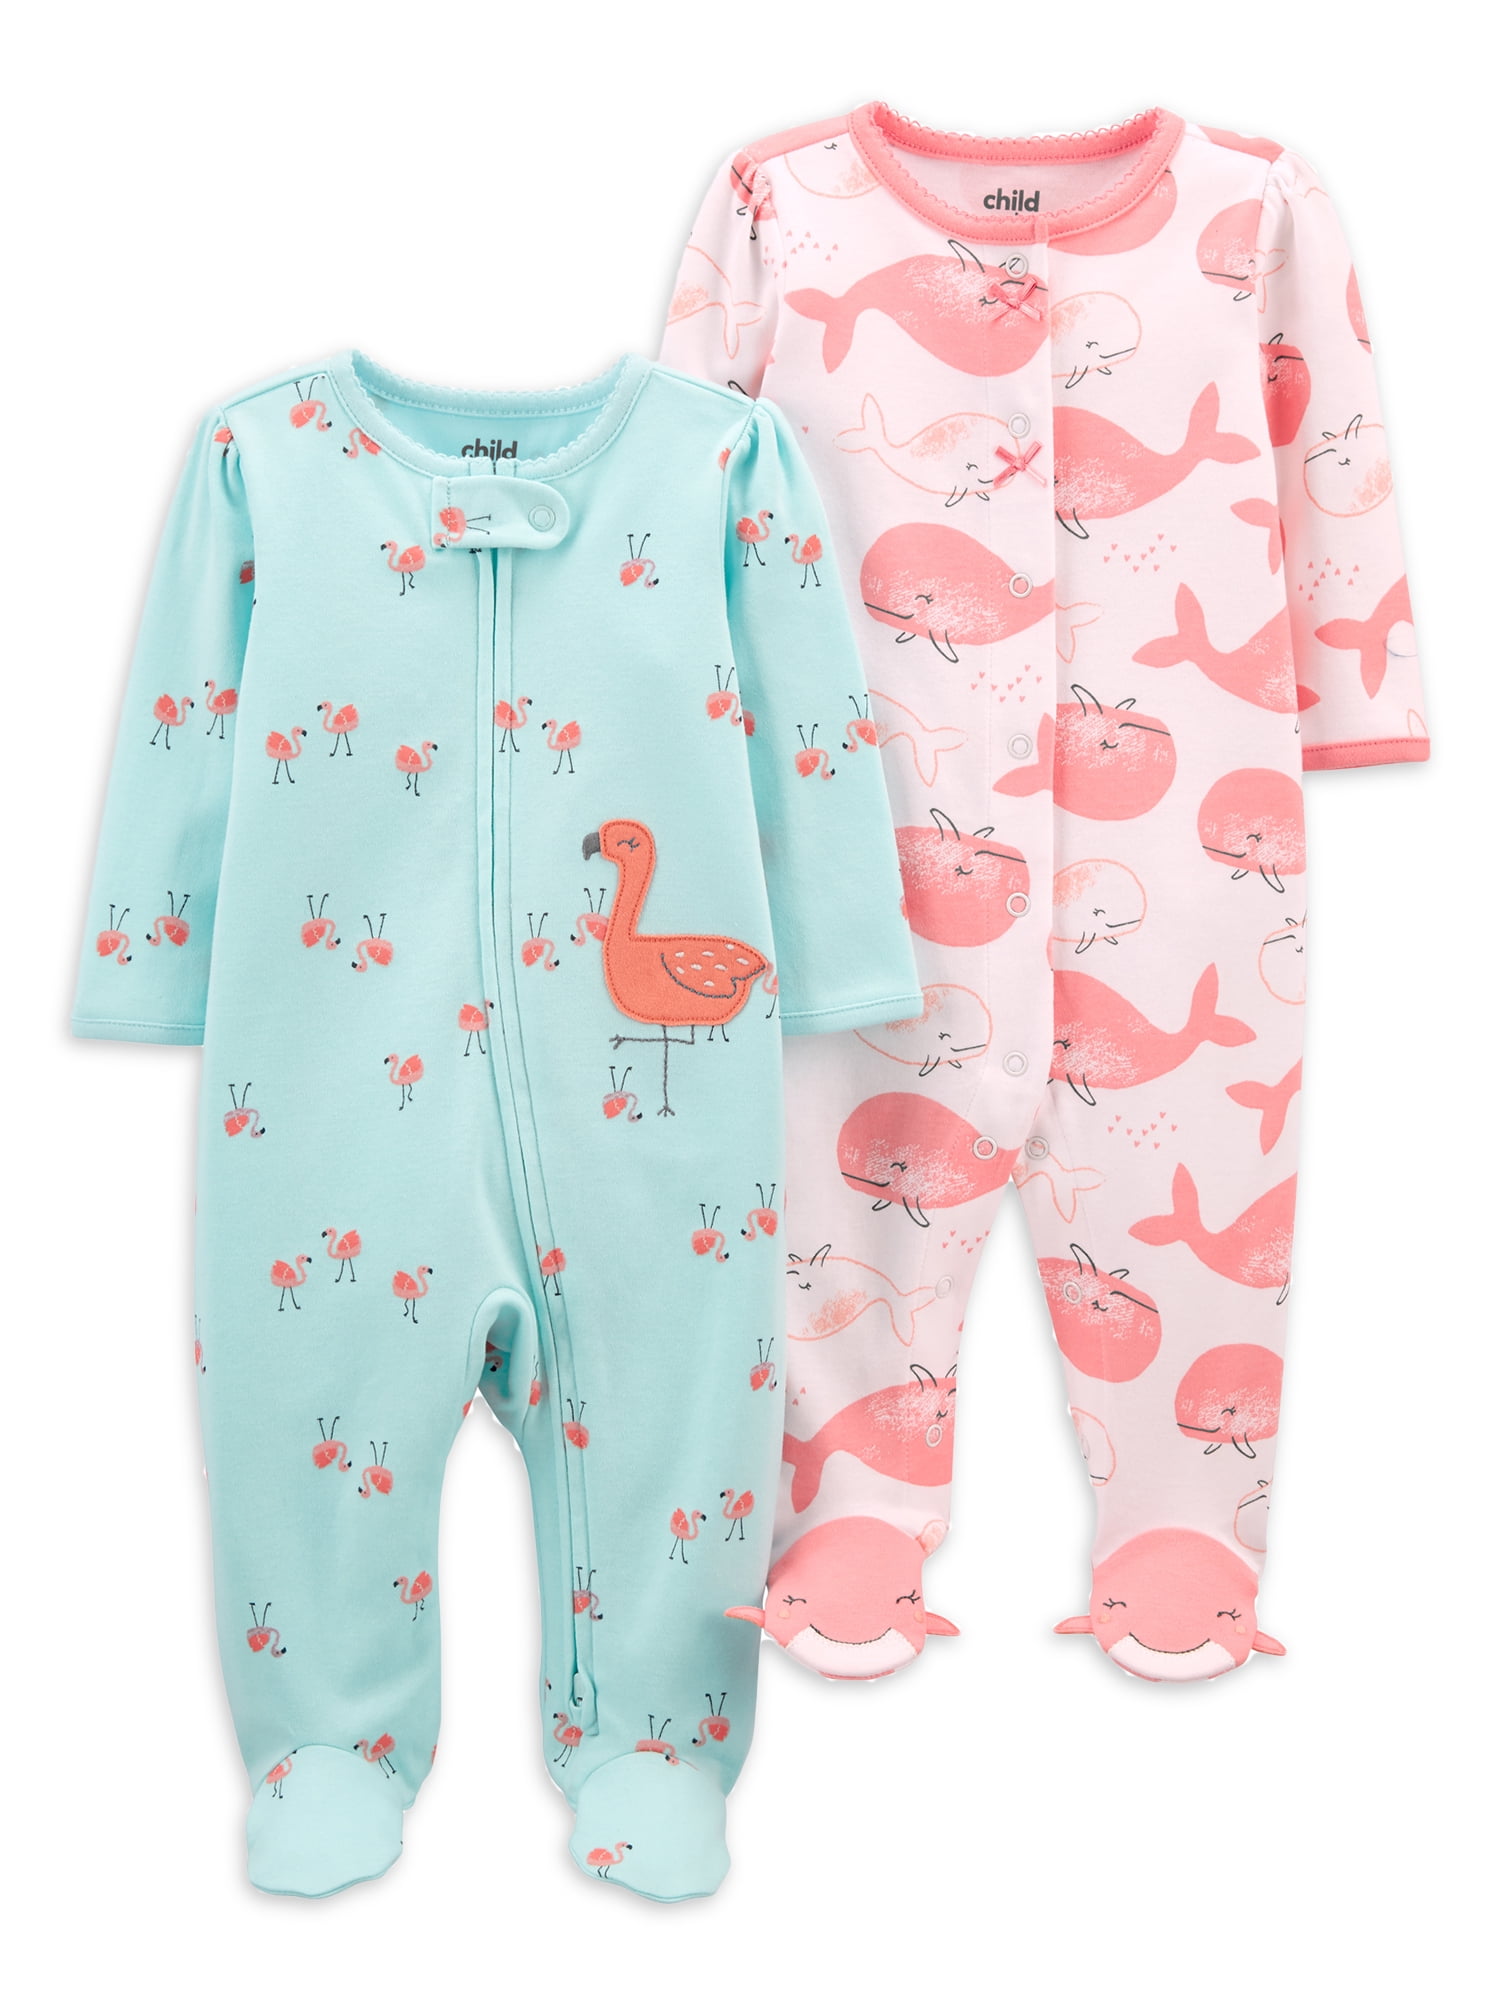 Carters Baby and Toddler Girls 2-Pack Fleece Footed Pajamas 